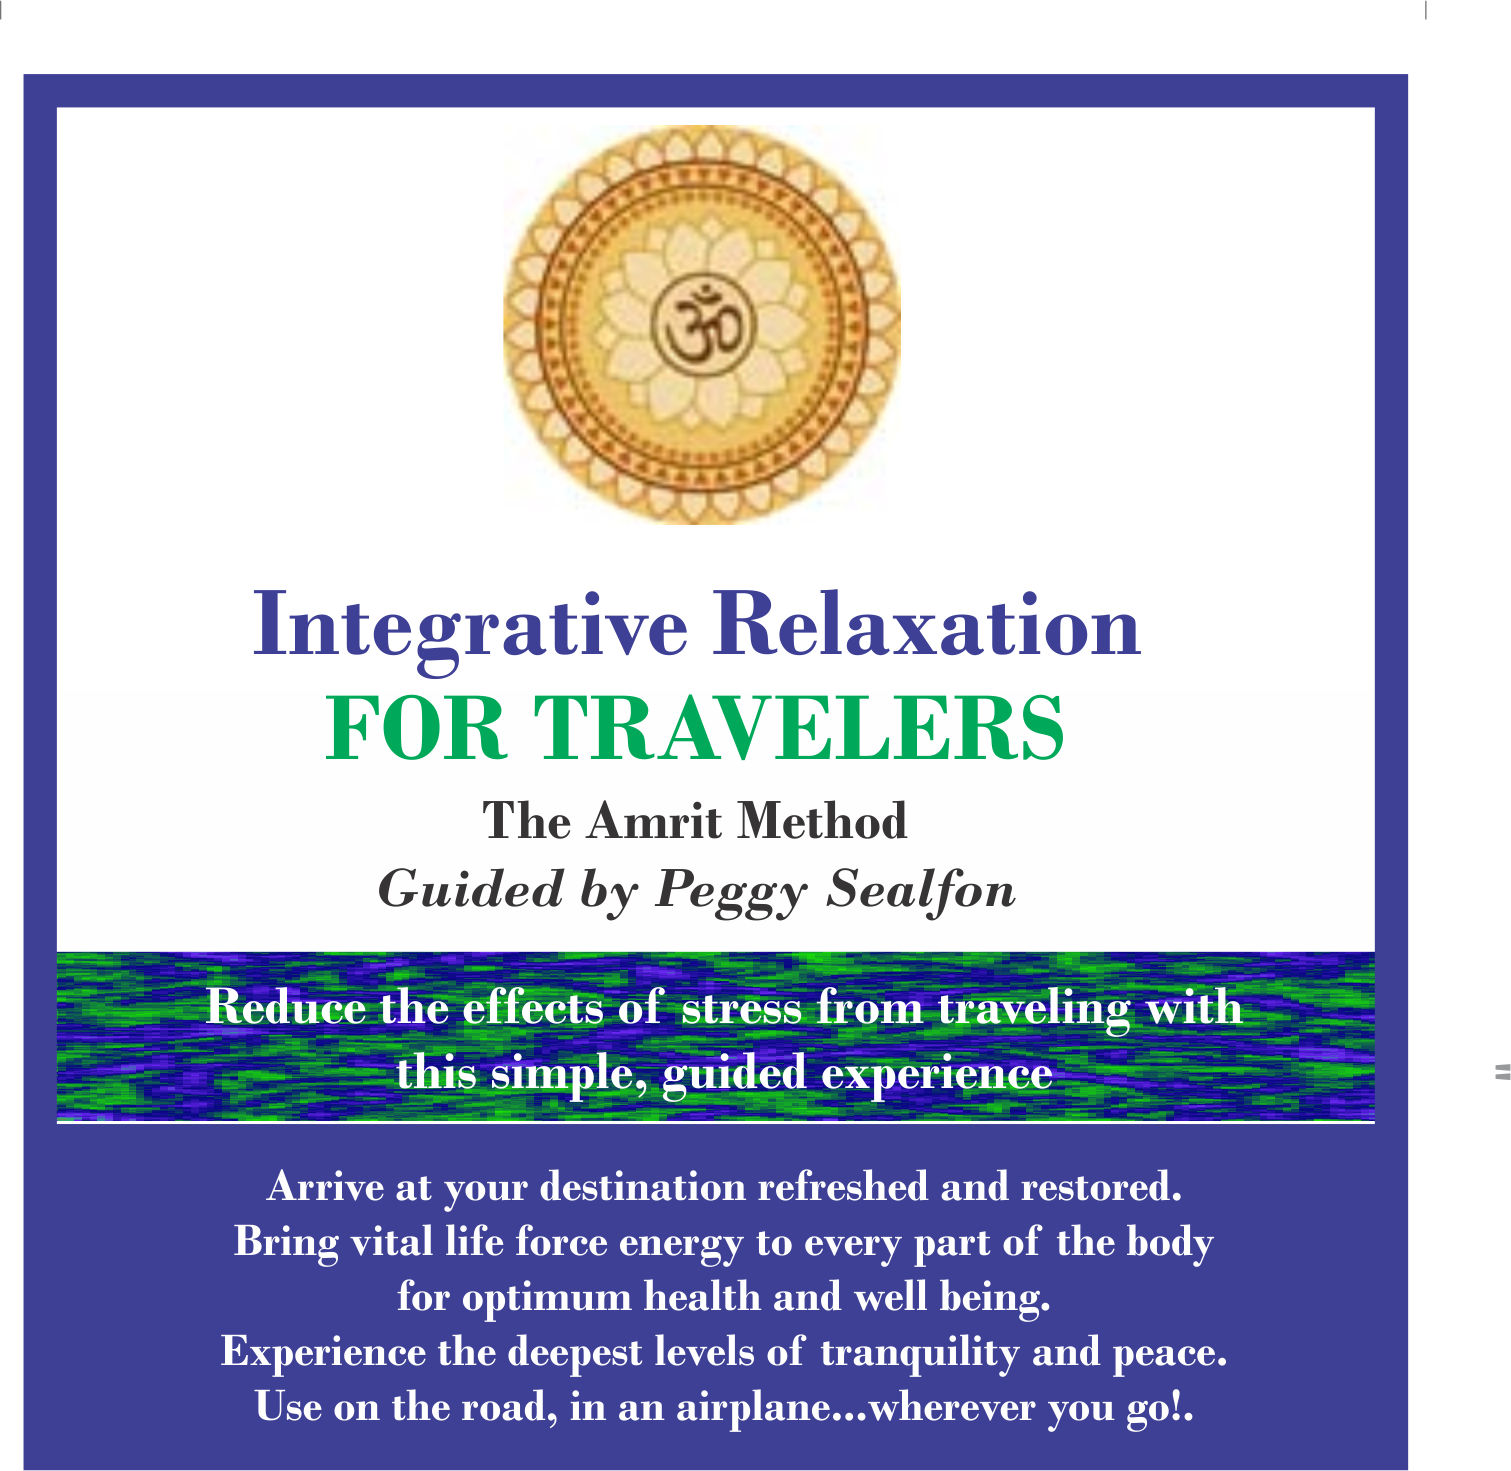 Integrative Relaxation for Travelers by Peggy Sealfon